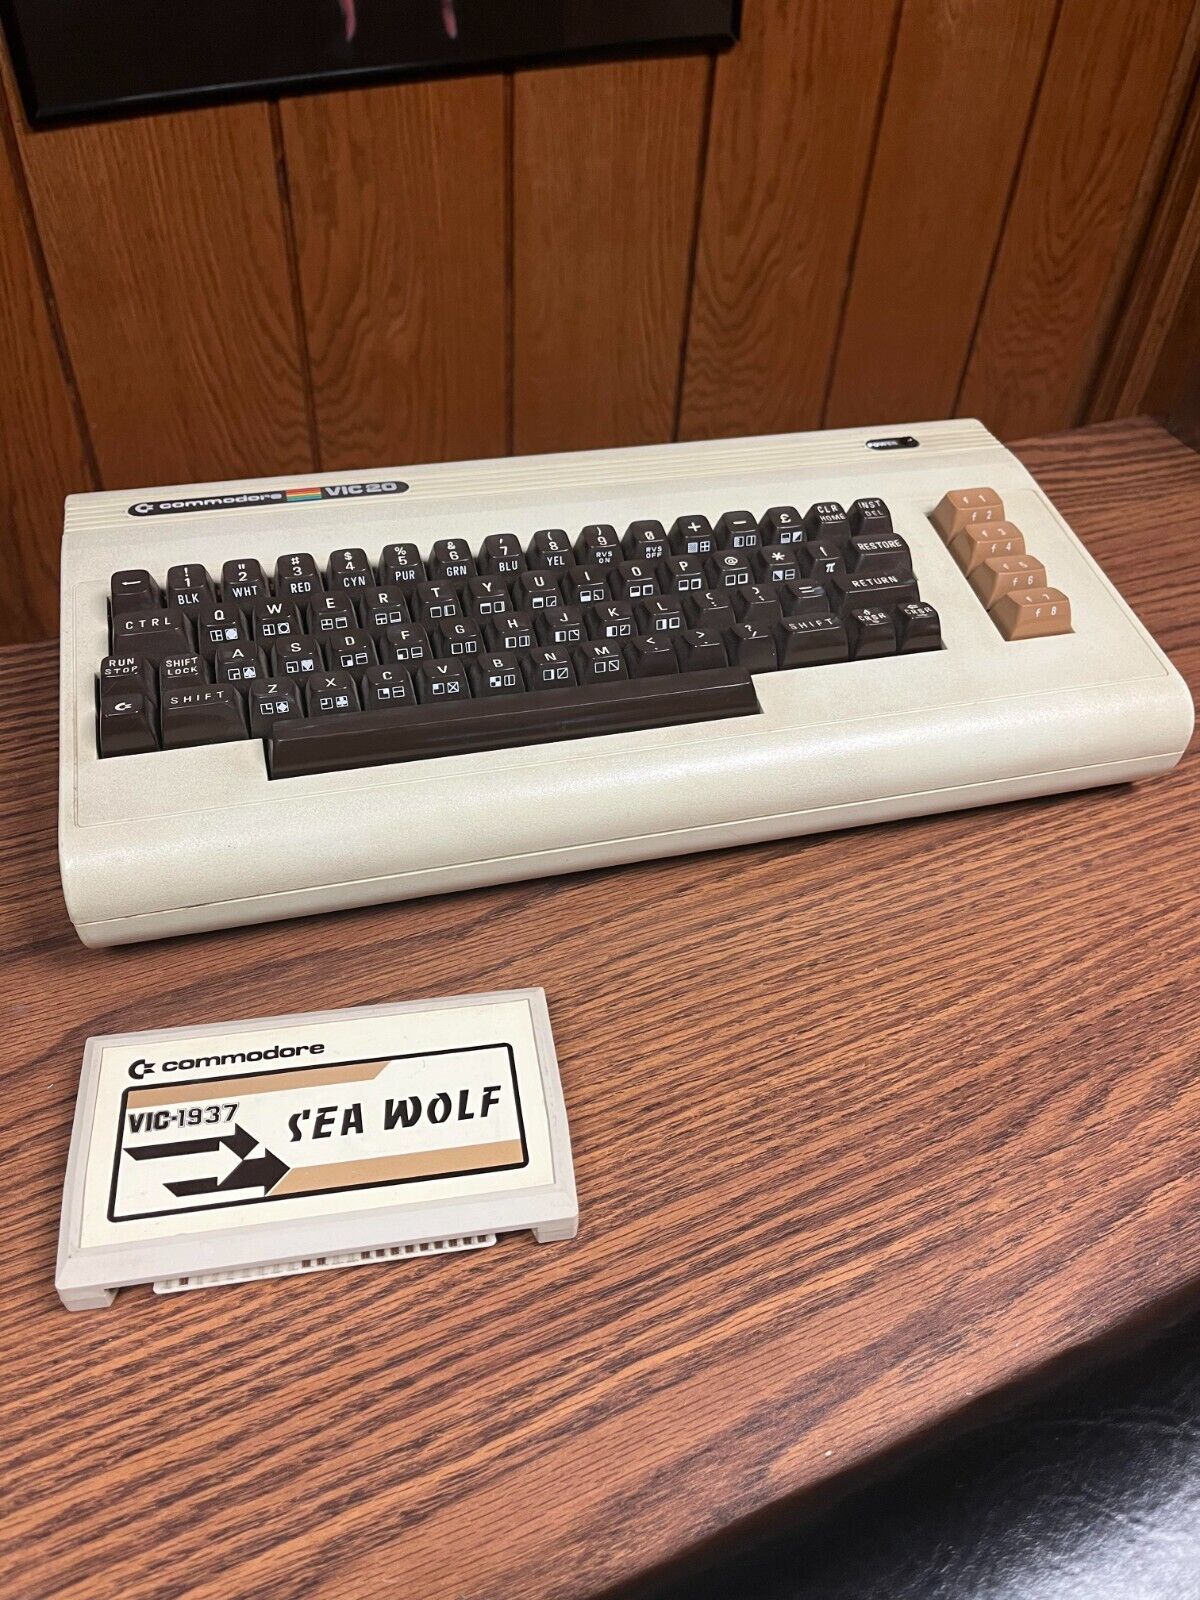 Rare Vintage Commodore VIC-20  / VIC20 Home Computer with Sea Wolf Game